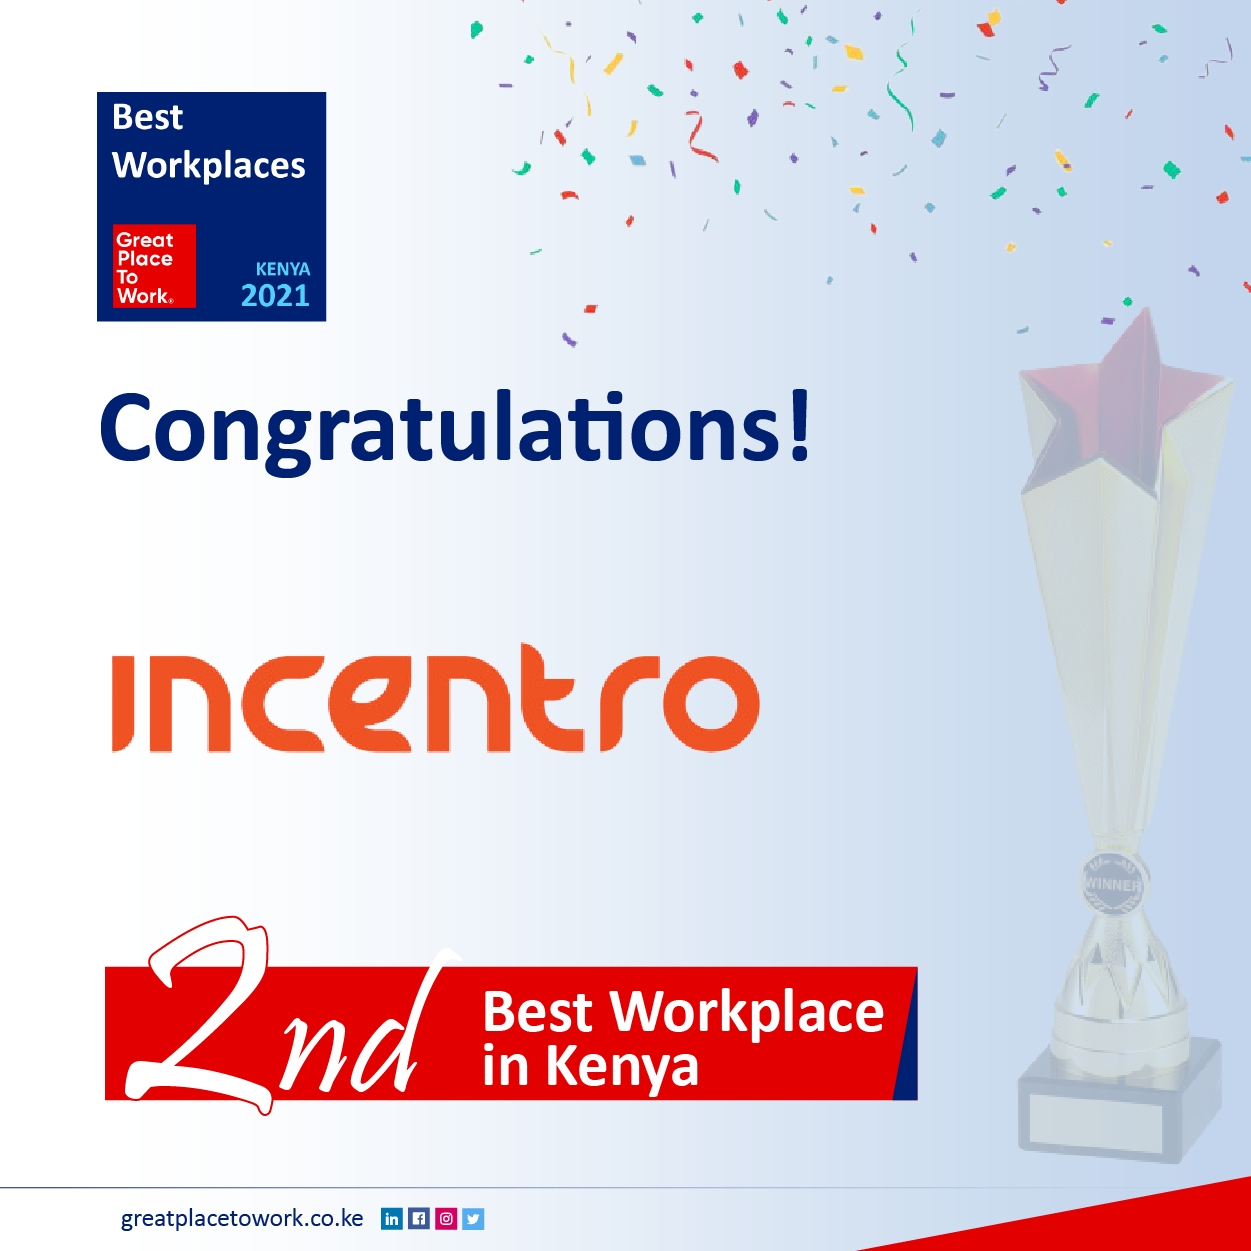  Incentro Africa emerges 2nd Best Workplace in Kenya 2021